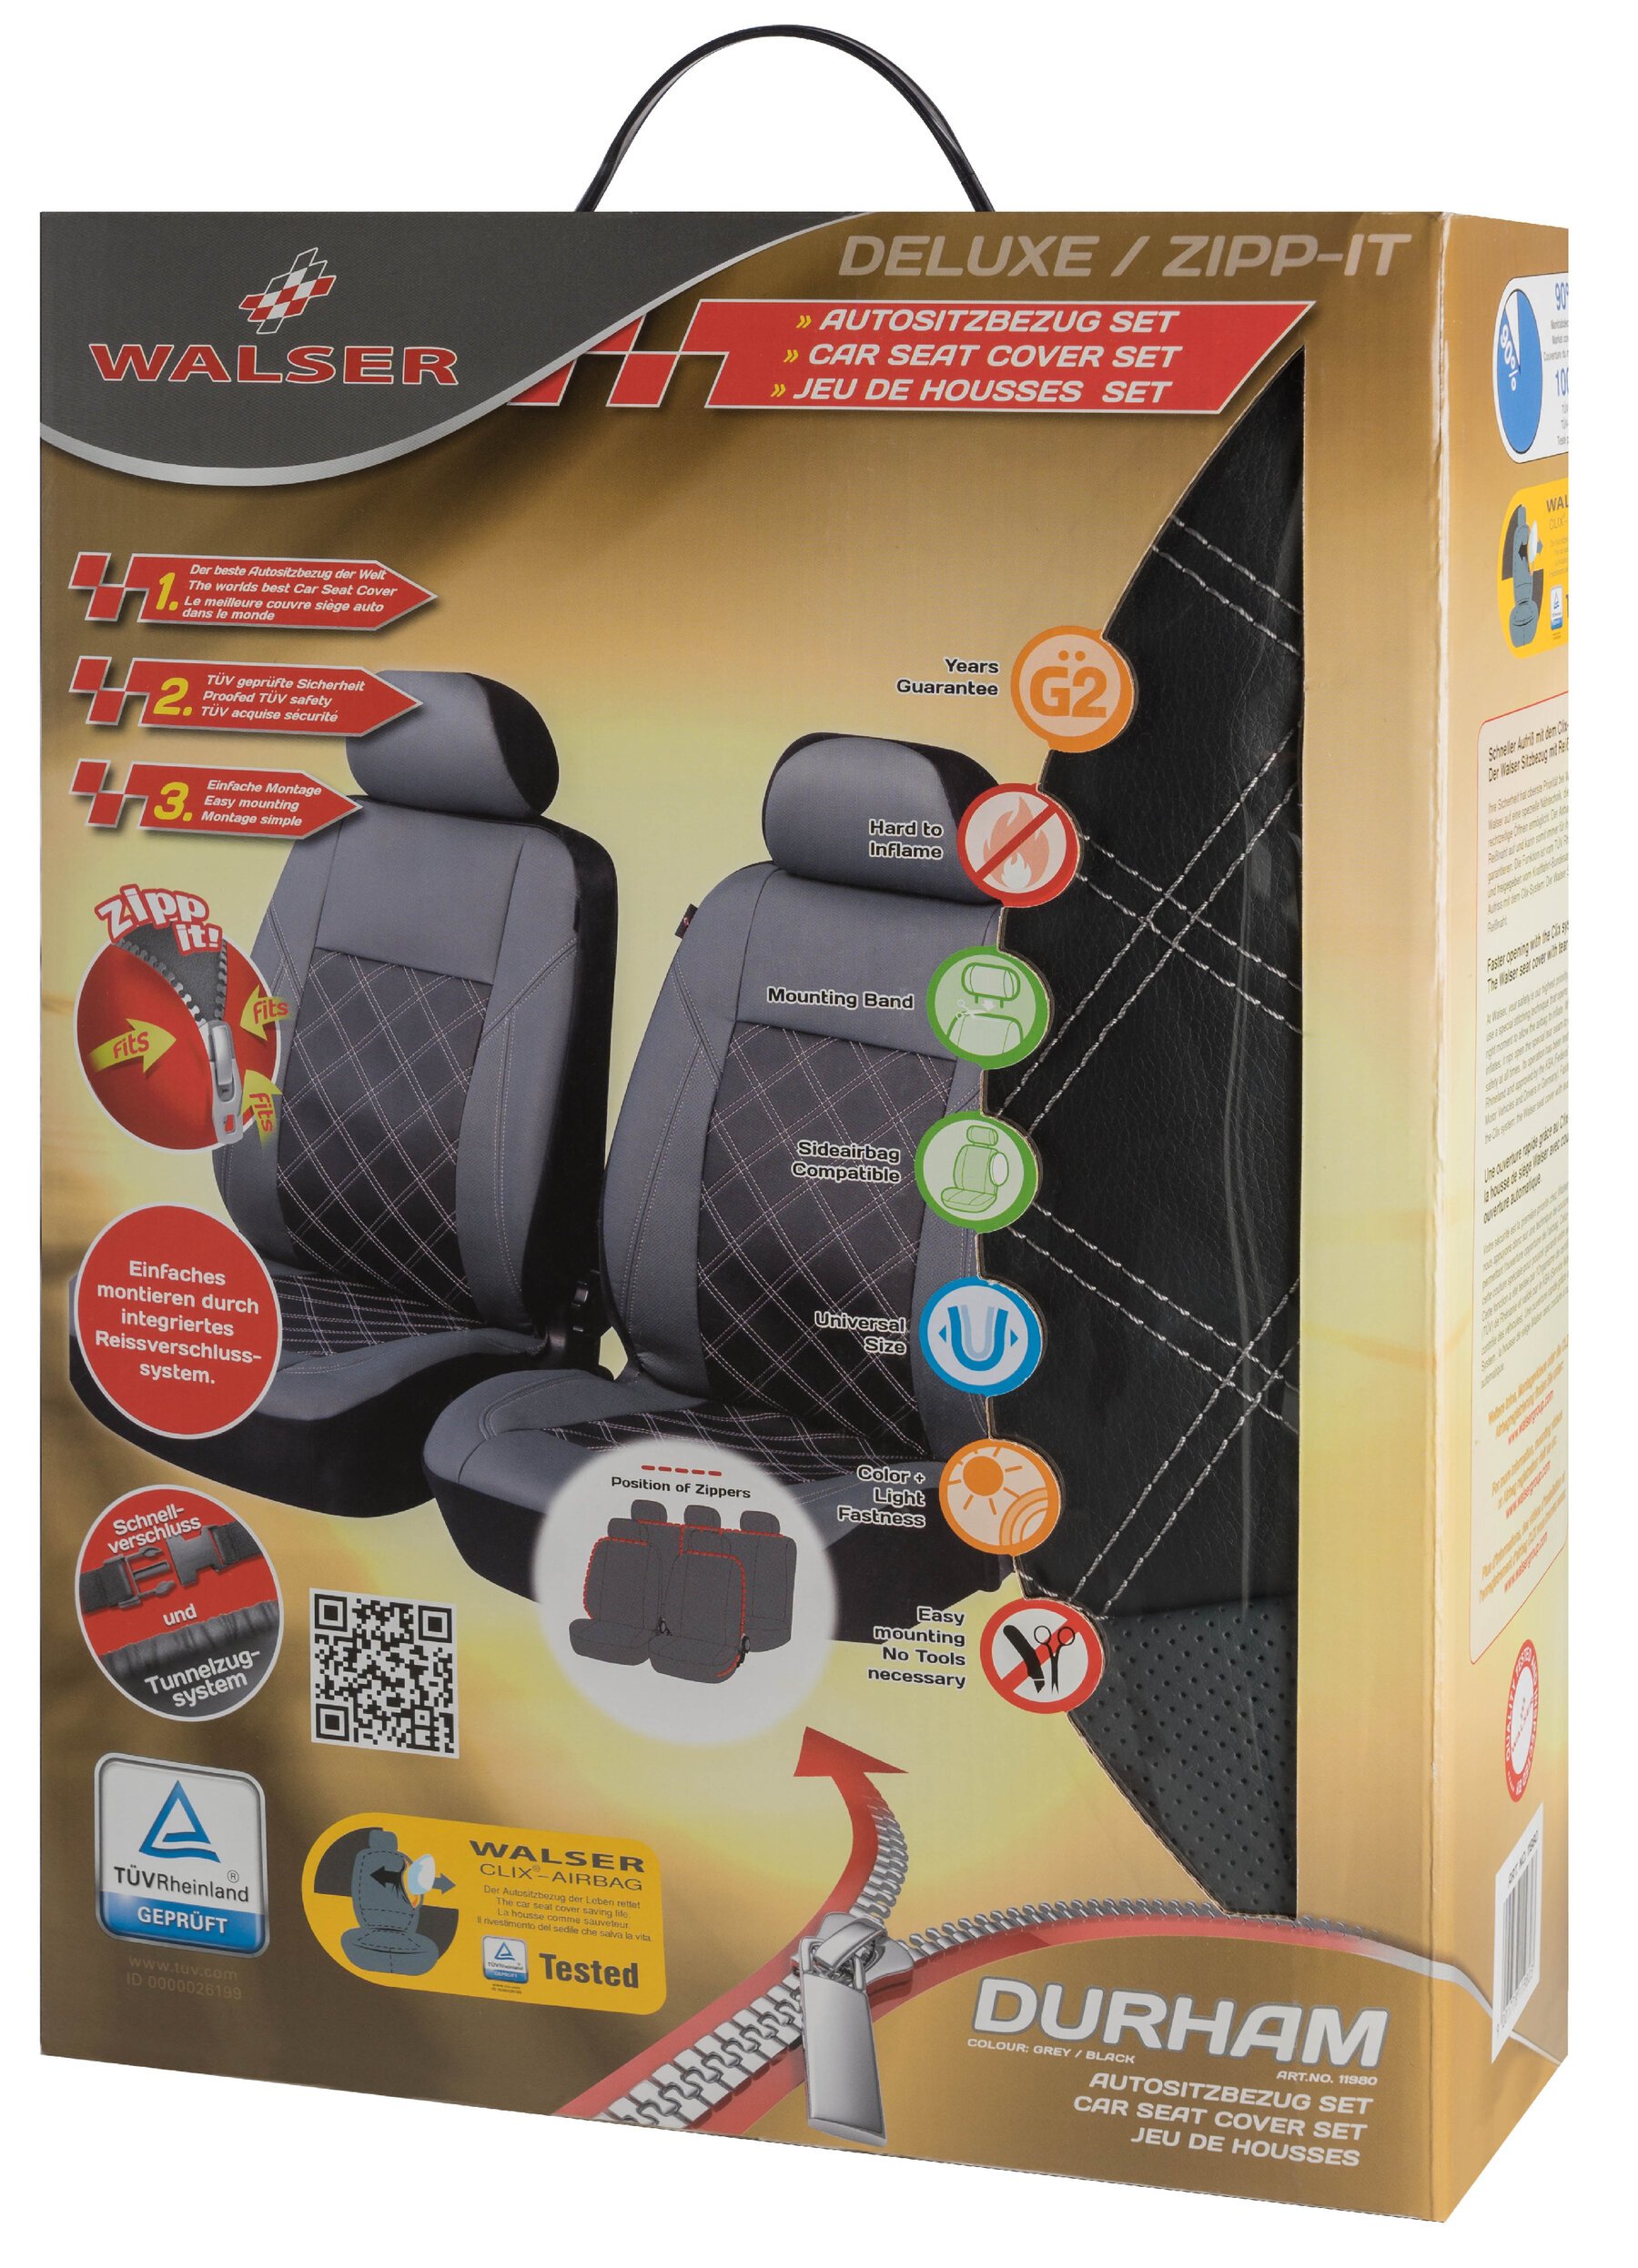 ZIPP IT Deluxe Durham car Seat covers in imitation leather for two front seats with zipper system